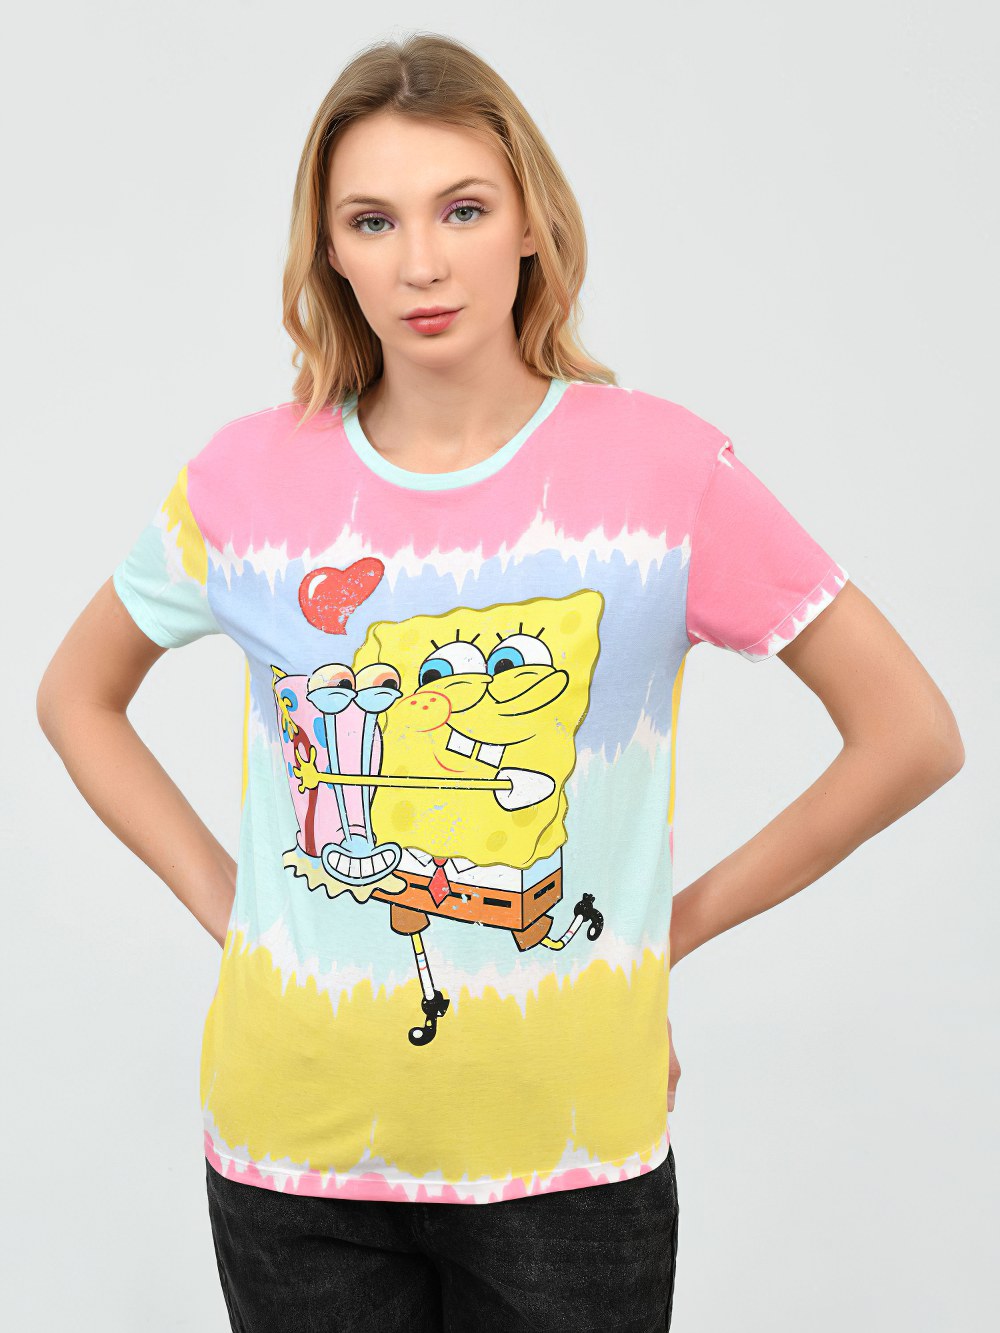 Gangster Spongebob With Love 3d Shirt Full Size Up To 5xl